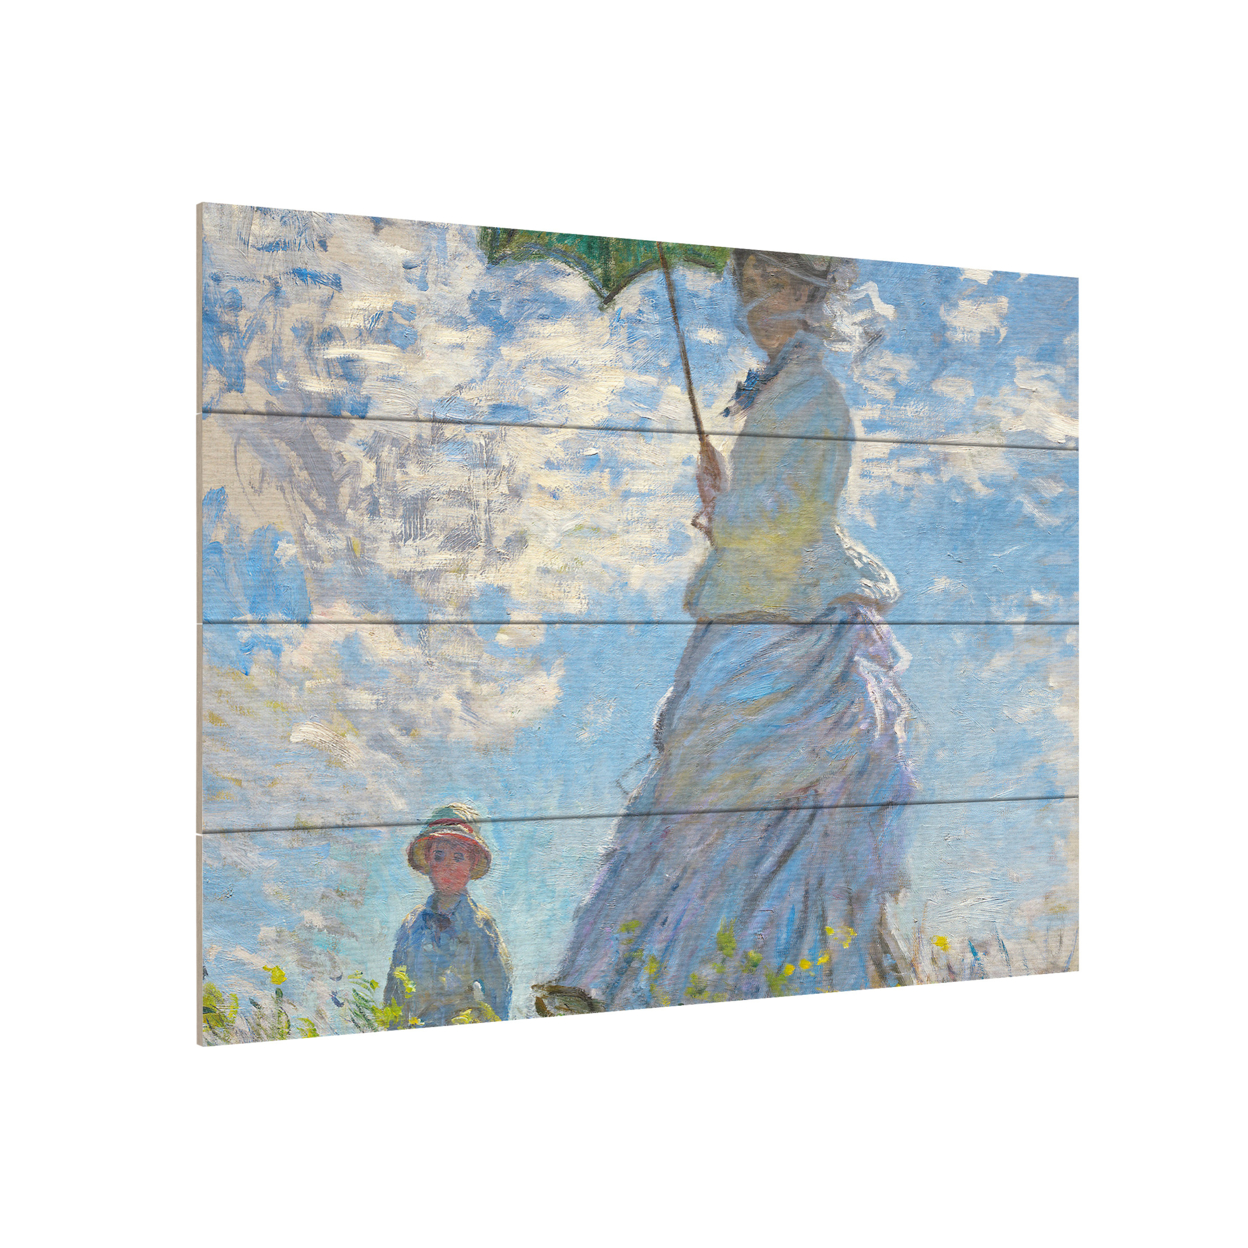 Wall Art 12 X 16 Inches Titled Woman With A Parasol 1875 Ready To Hang Printed On Wooden Planks